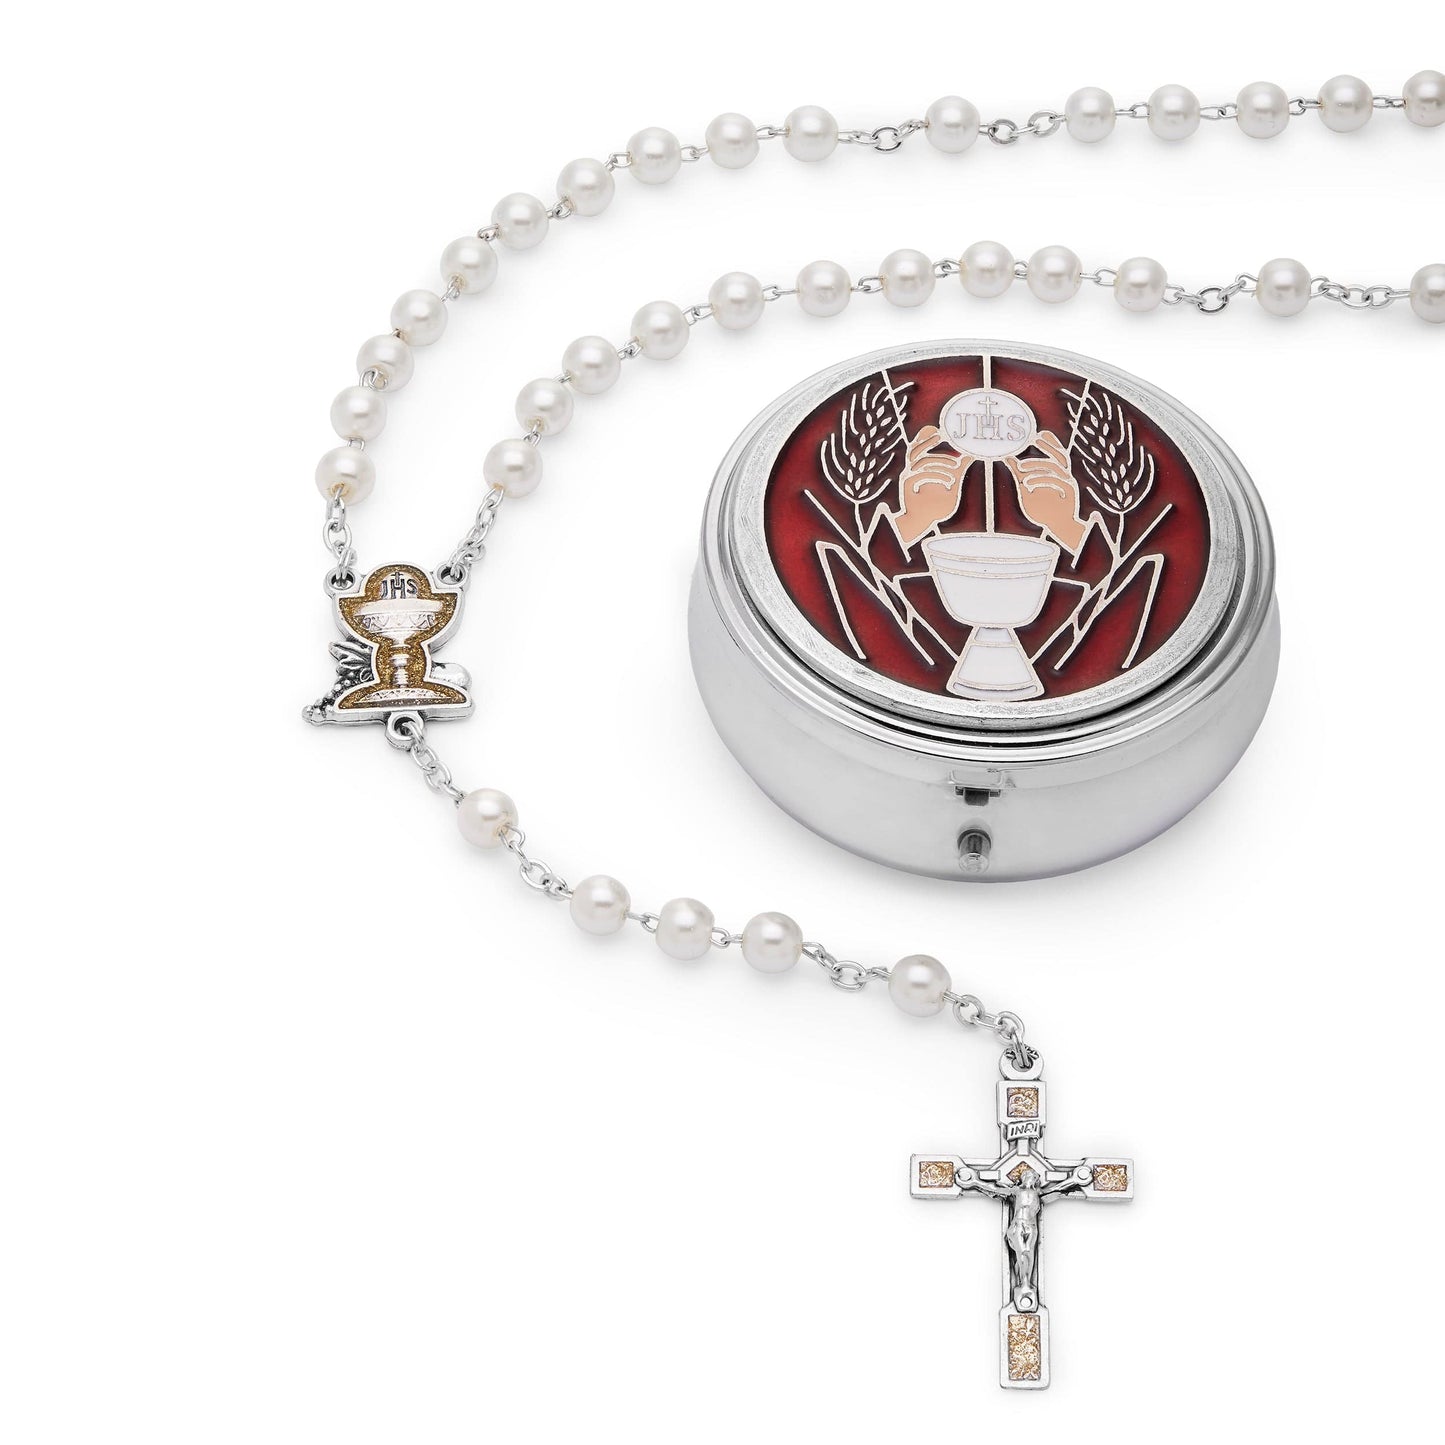 MONDO CATTOLICO First Communion Rosary with the Chalice center Medal